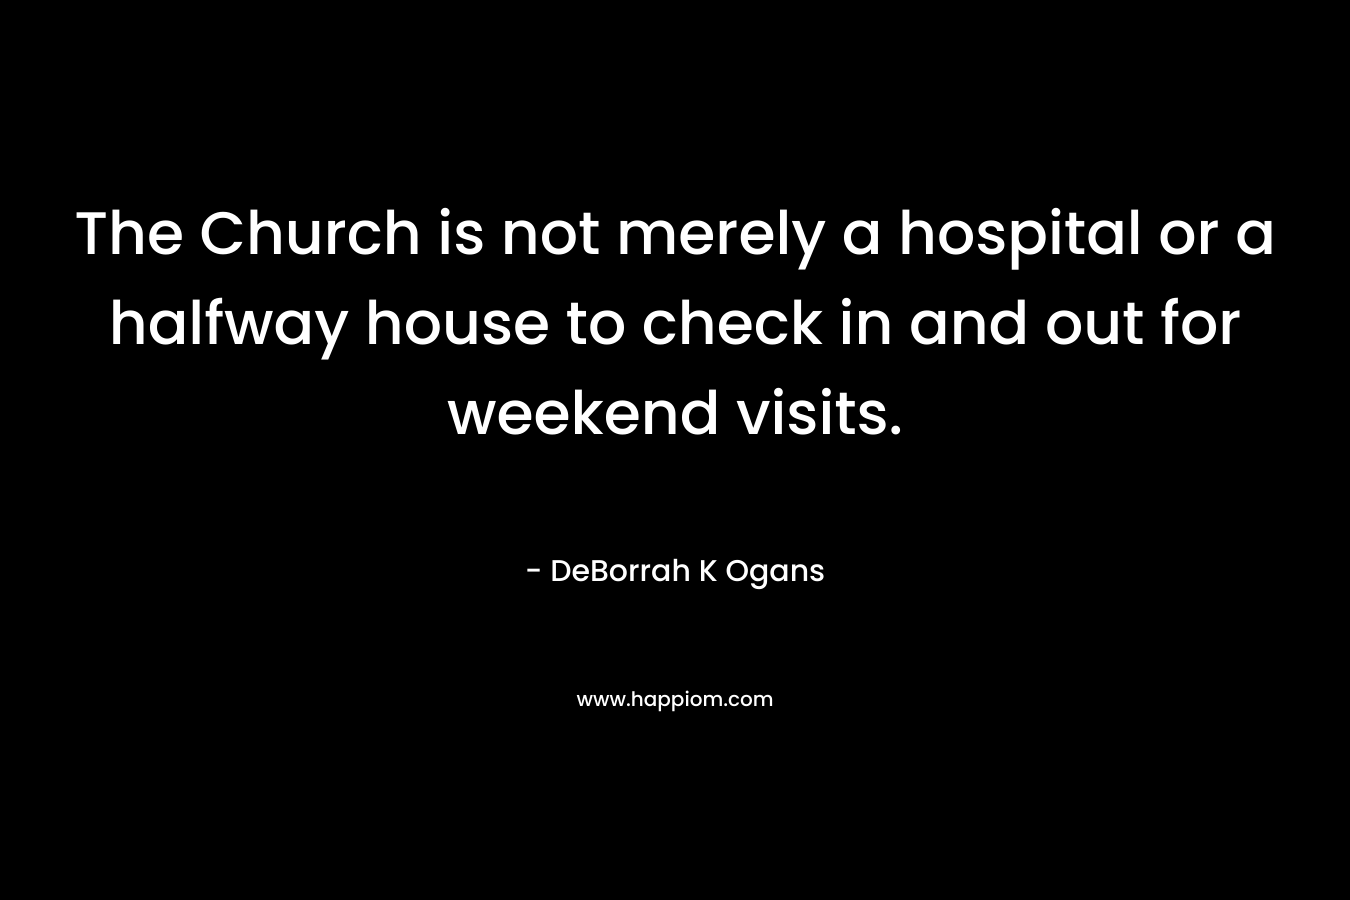 The Church is not merely a hospital or a halfway house to check in and out for weekend visits. – DeBorrah K Ogans